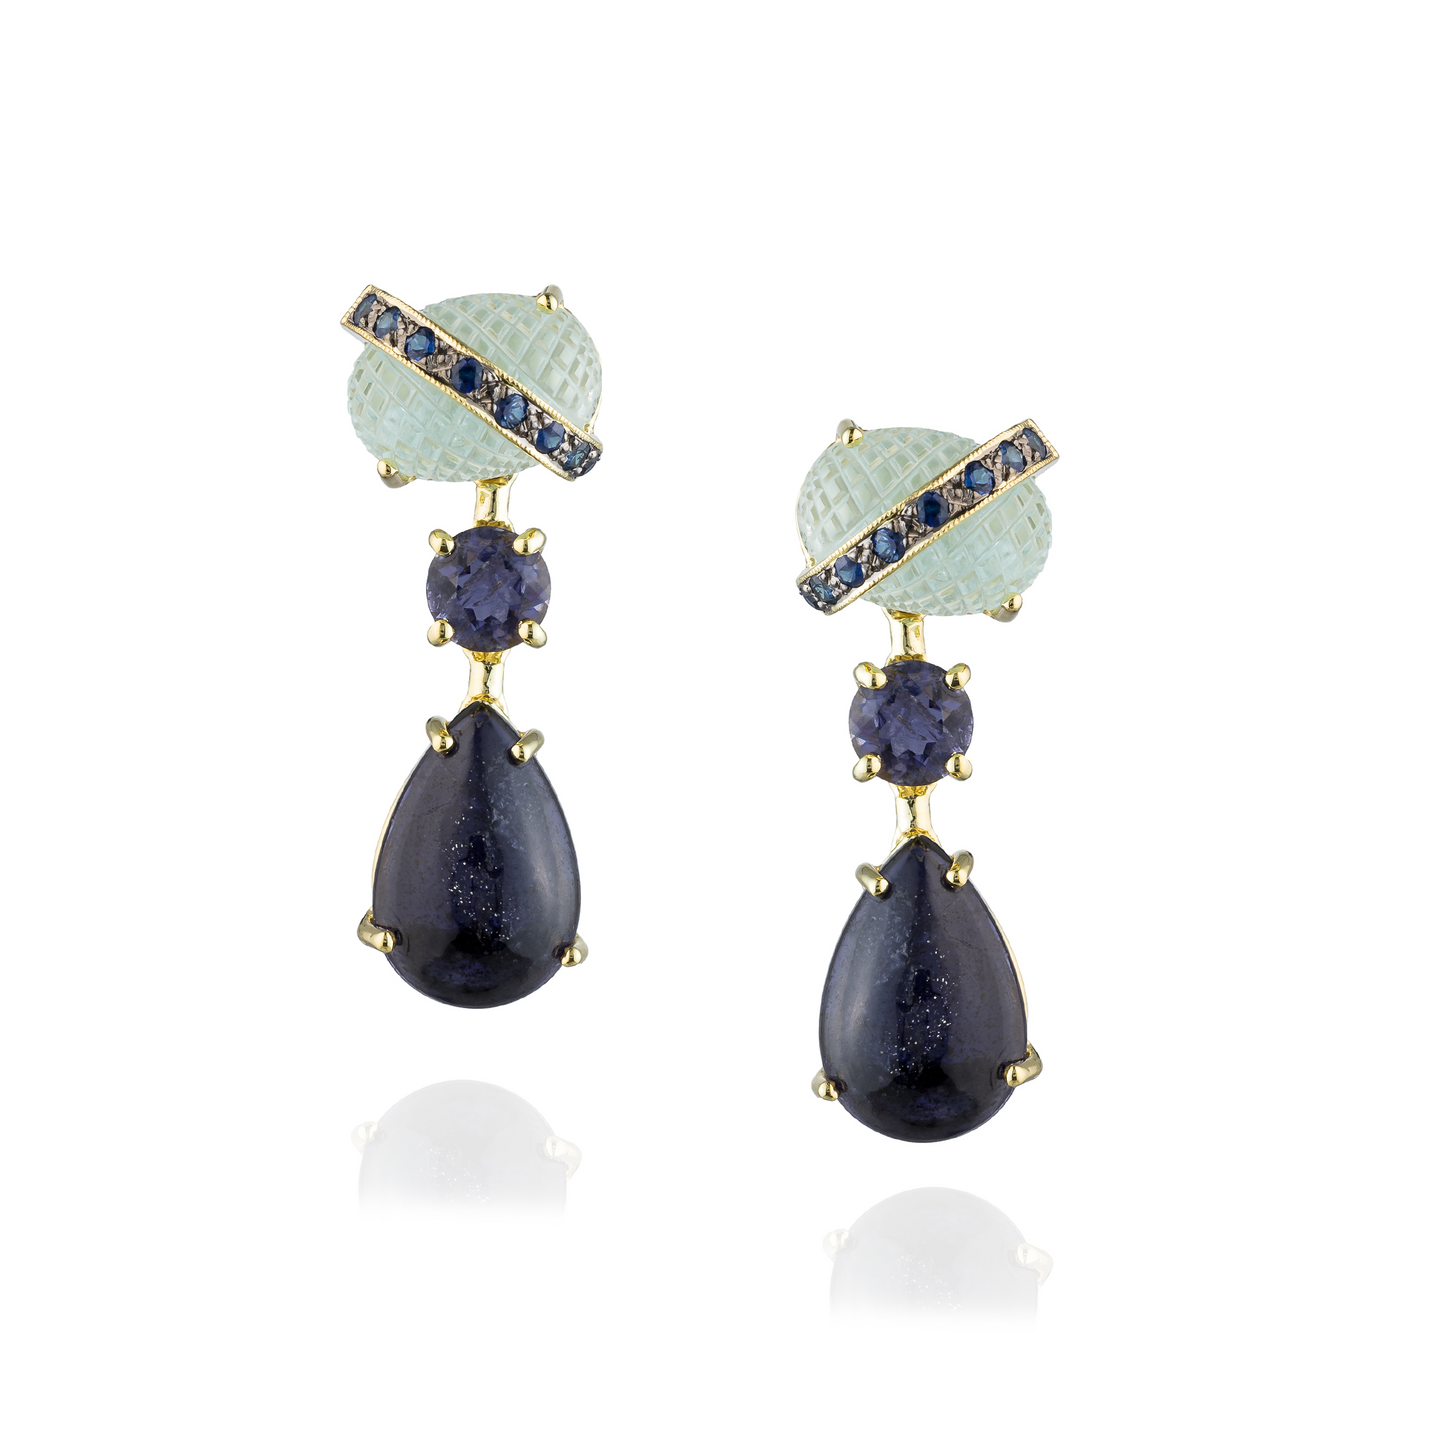 New Cab 925 Silver Earrings with Sapphire, Aquamarine  and Iolite